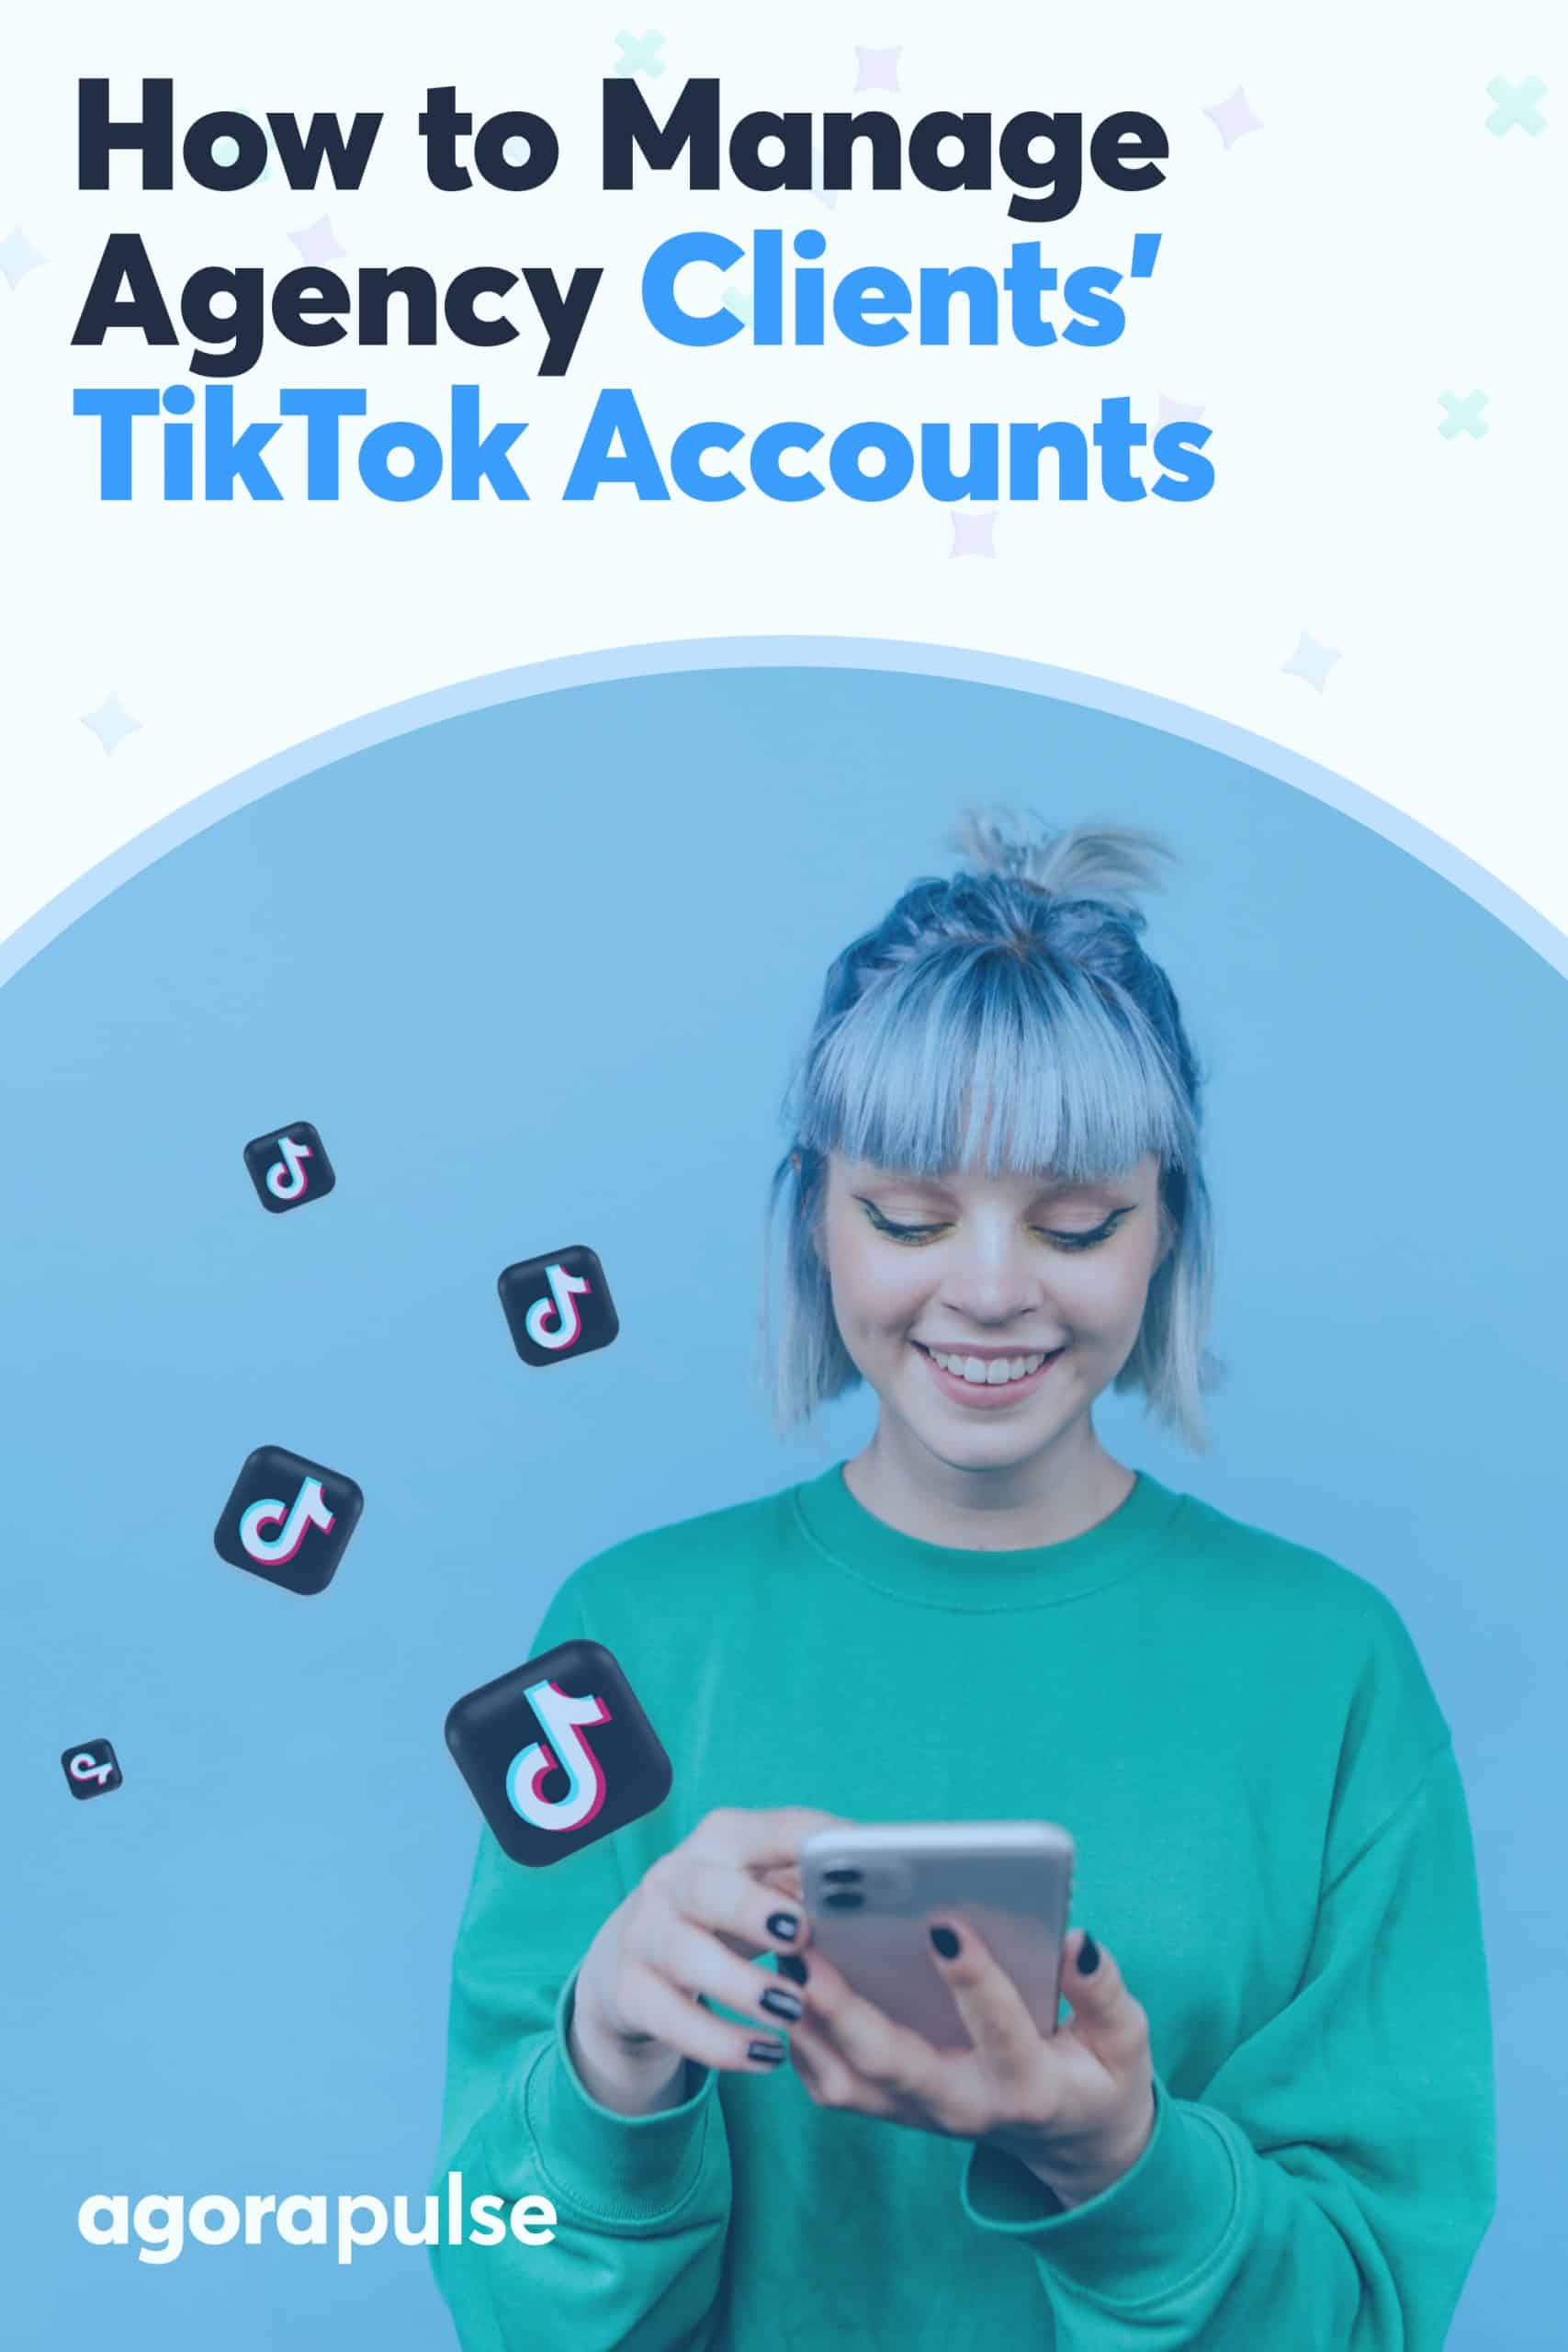 How Agencies Can Manage Their Clients’ TikTok Accounts